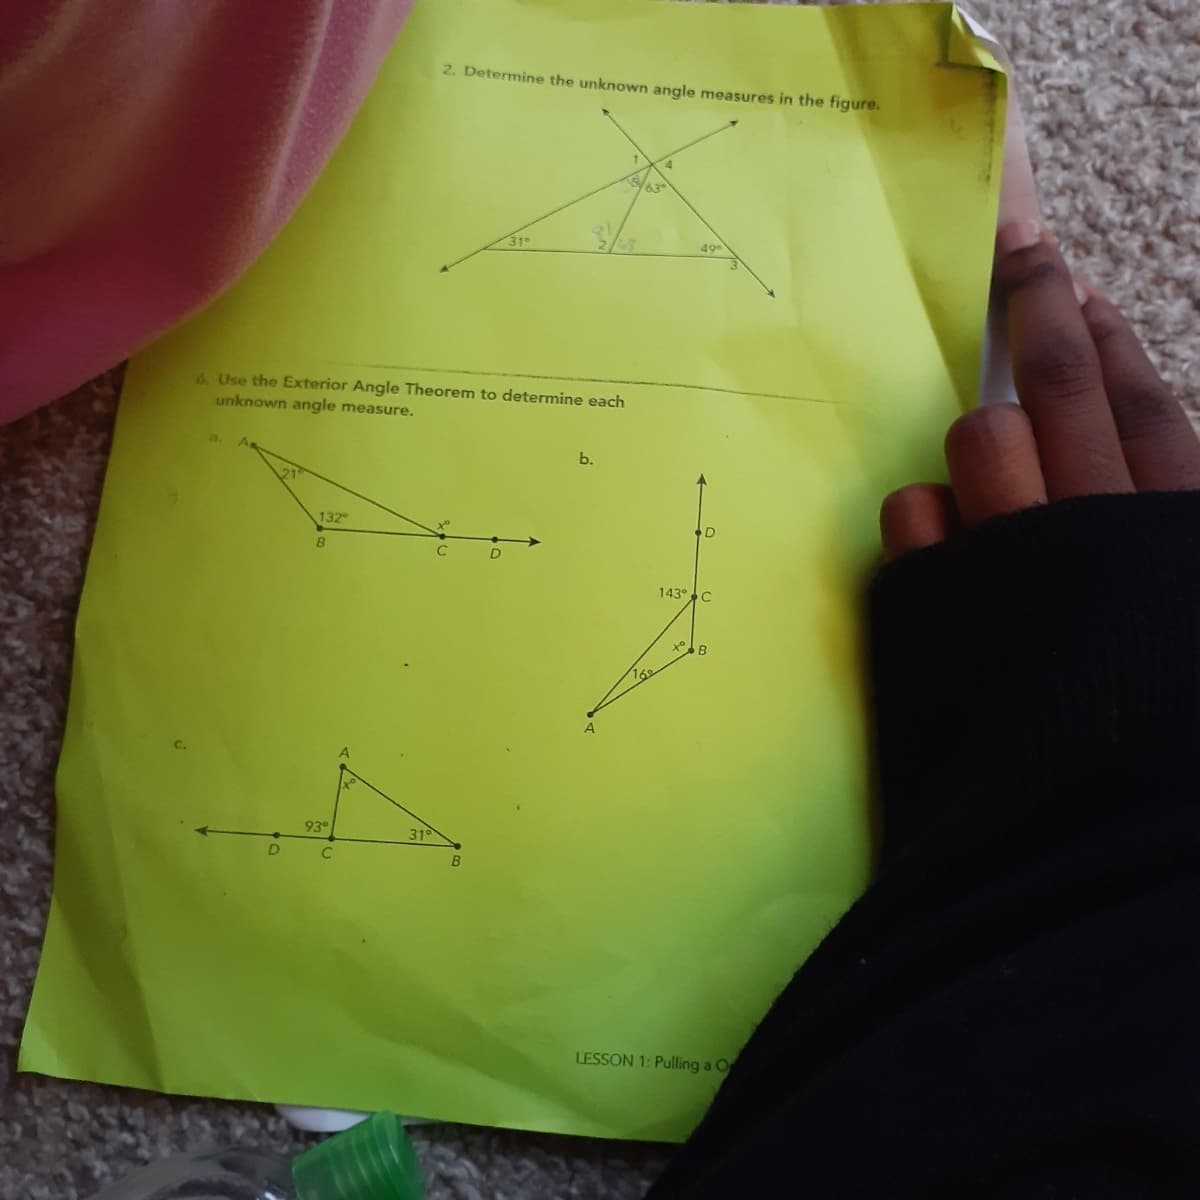 2. Determine the unknown angle measures in the figure.
63
31
6. Use the Exterior Angle Theorem to determine each
unknown angle measure.
b.
132
B
143°C
16
93°
319
D
LESSON 1: Pulling a O
